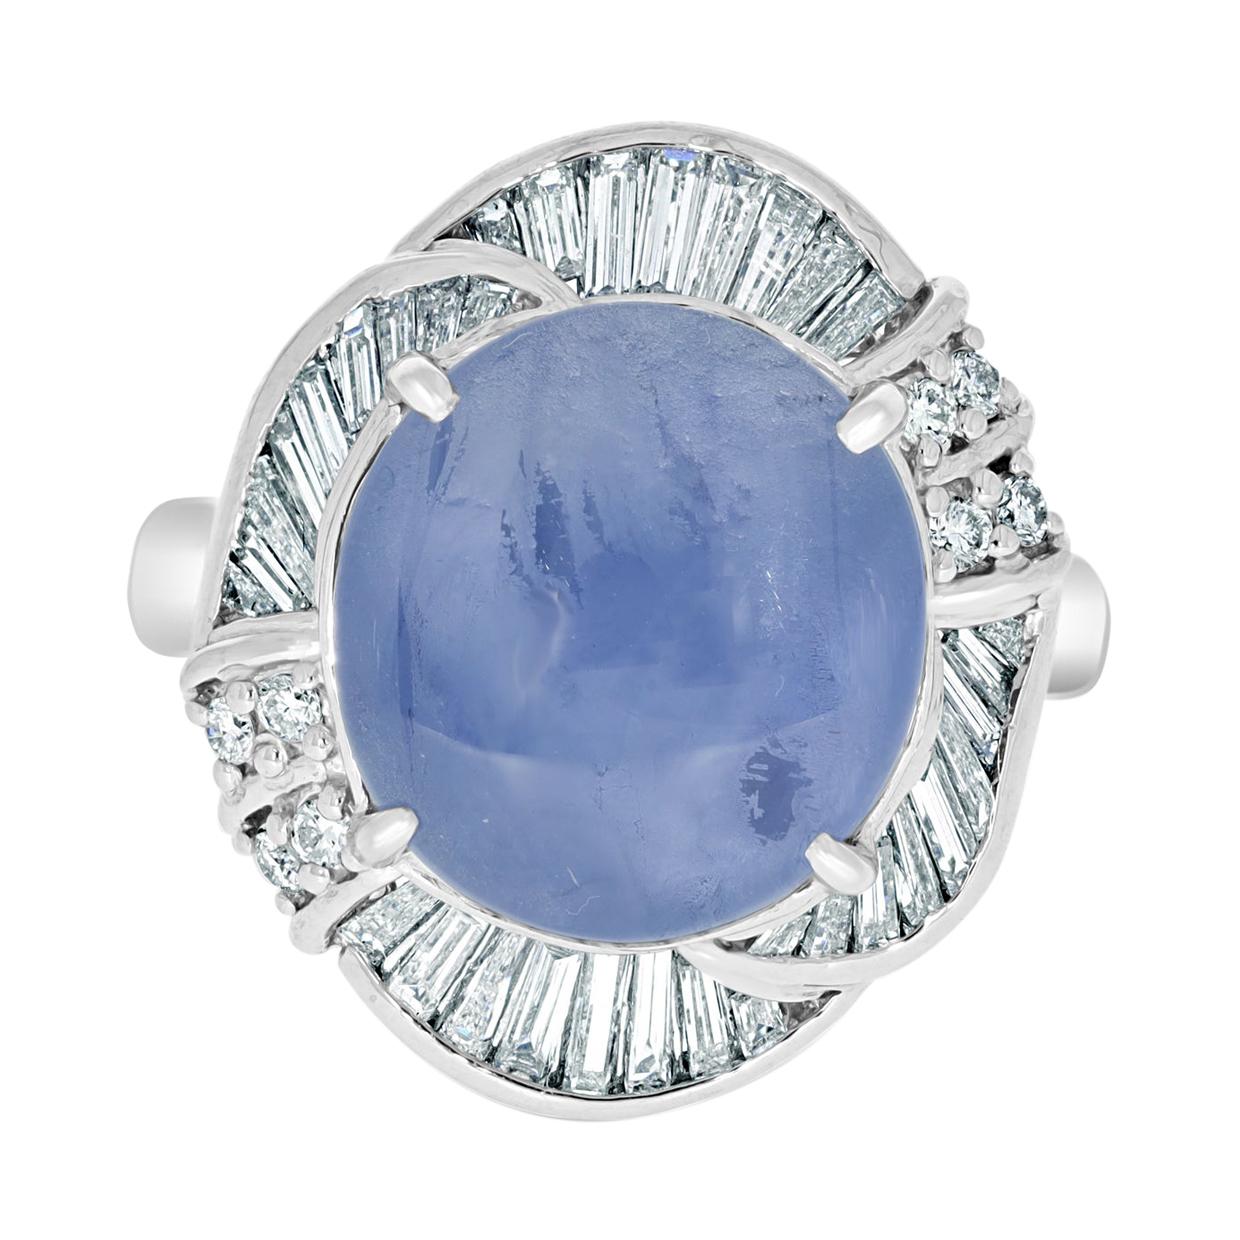 10.60ct Star Sapphire Ring with 0.95tct Diamonds Set in Platinum